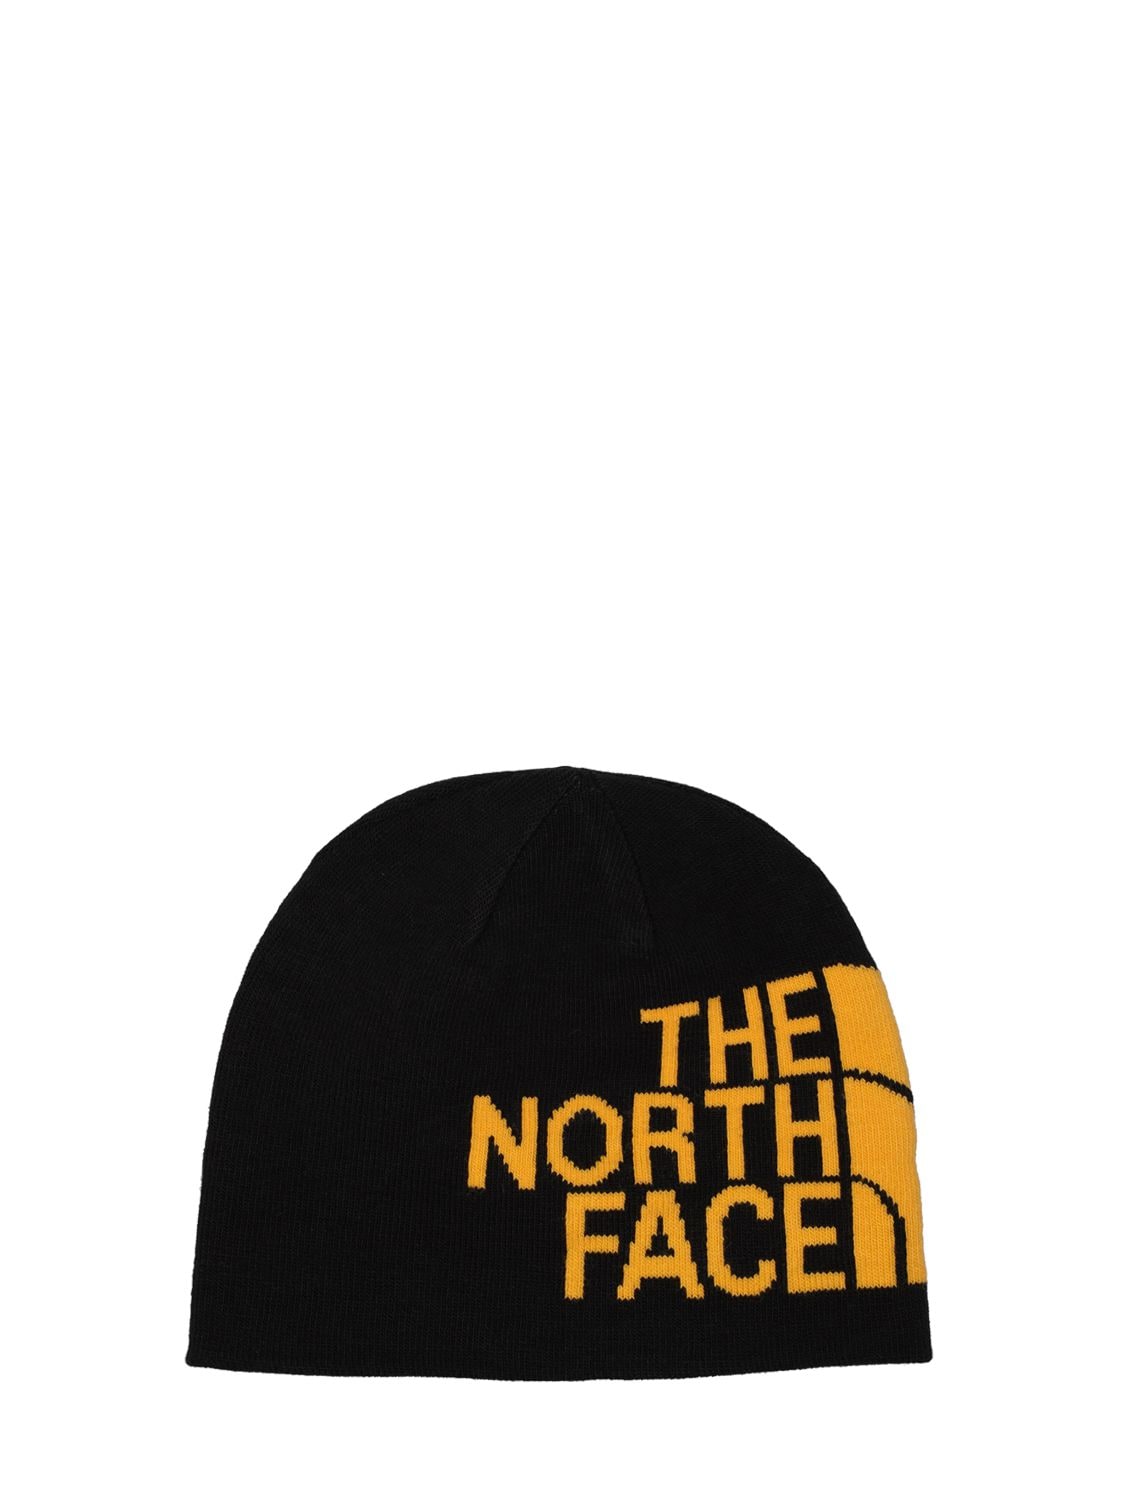 THE NORTH FACE REVERSIBLE BANNER BEANIE HAT